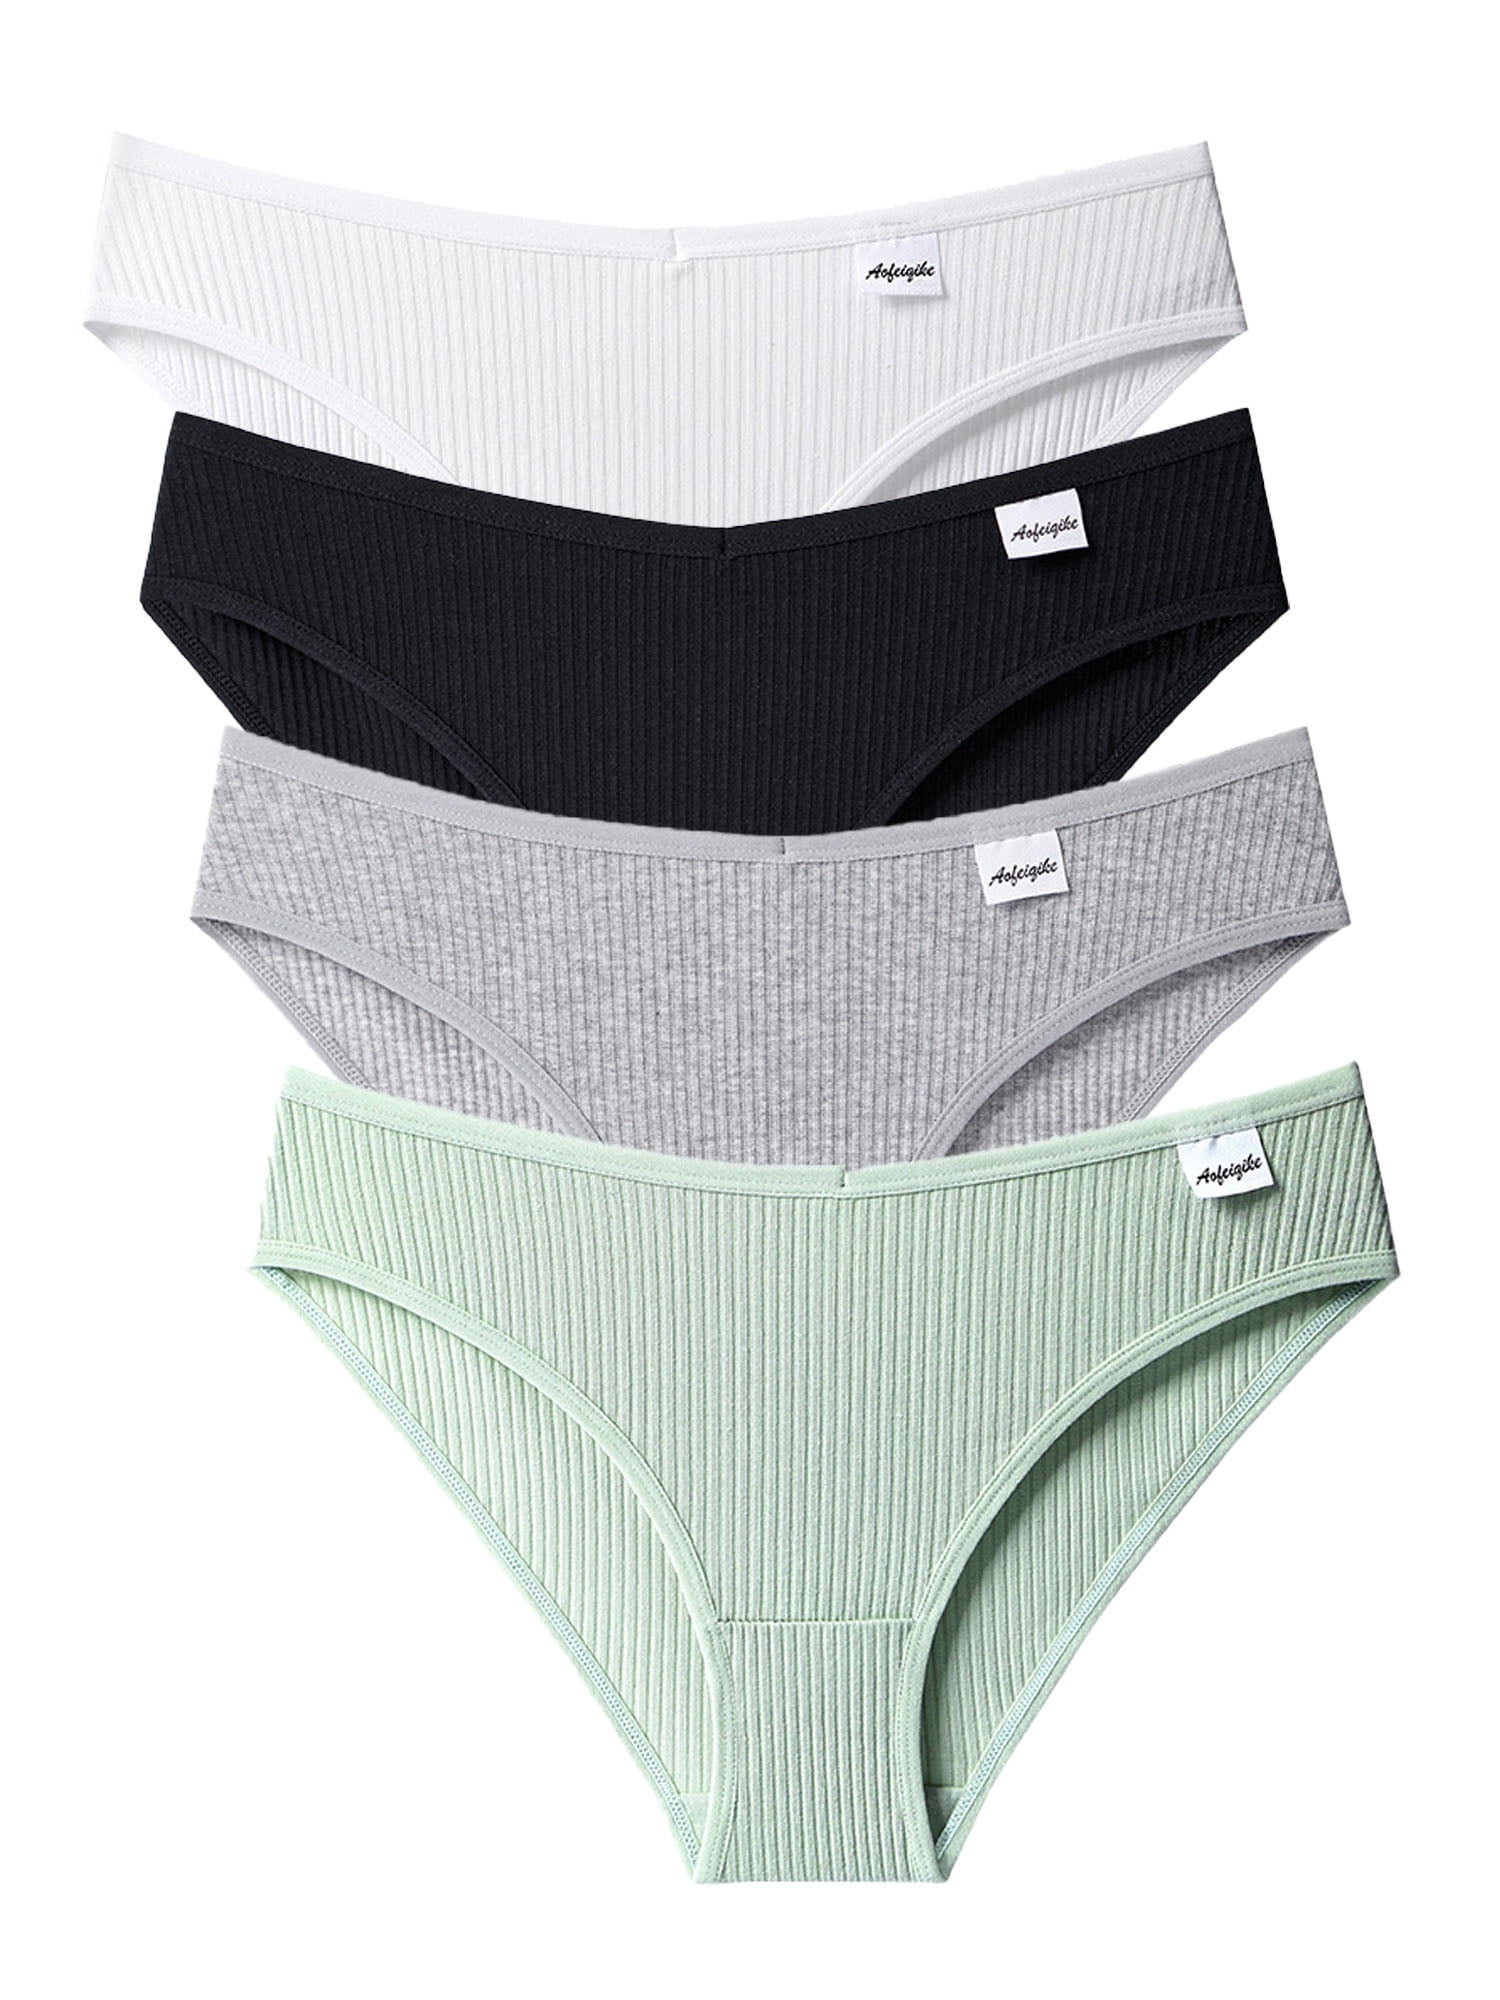 FINETOO 6 Pack Cotton Underwear for Women Cheeky High Cut Breathable Hipster  Bikini Striped Panties Pack S-XL 